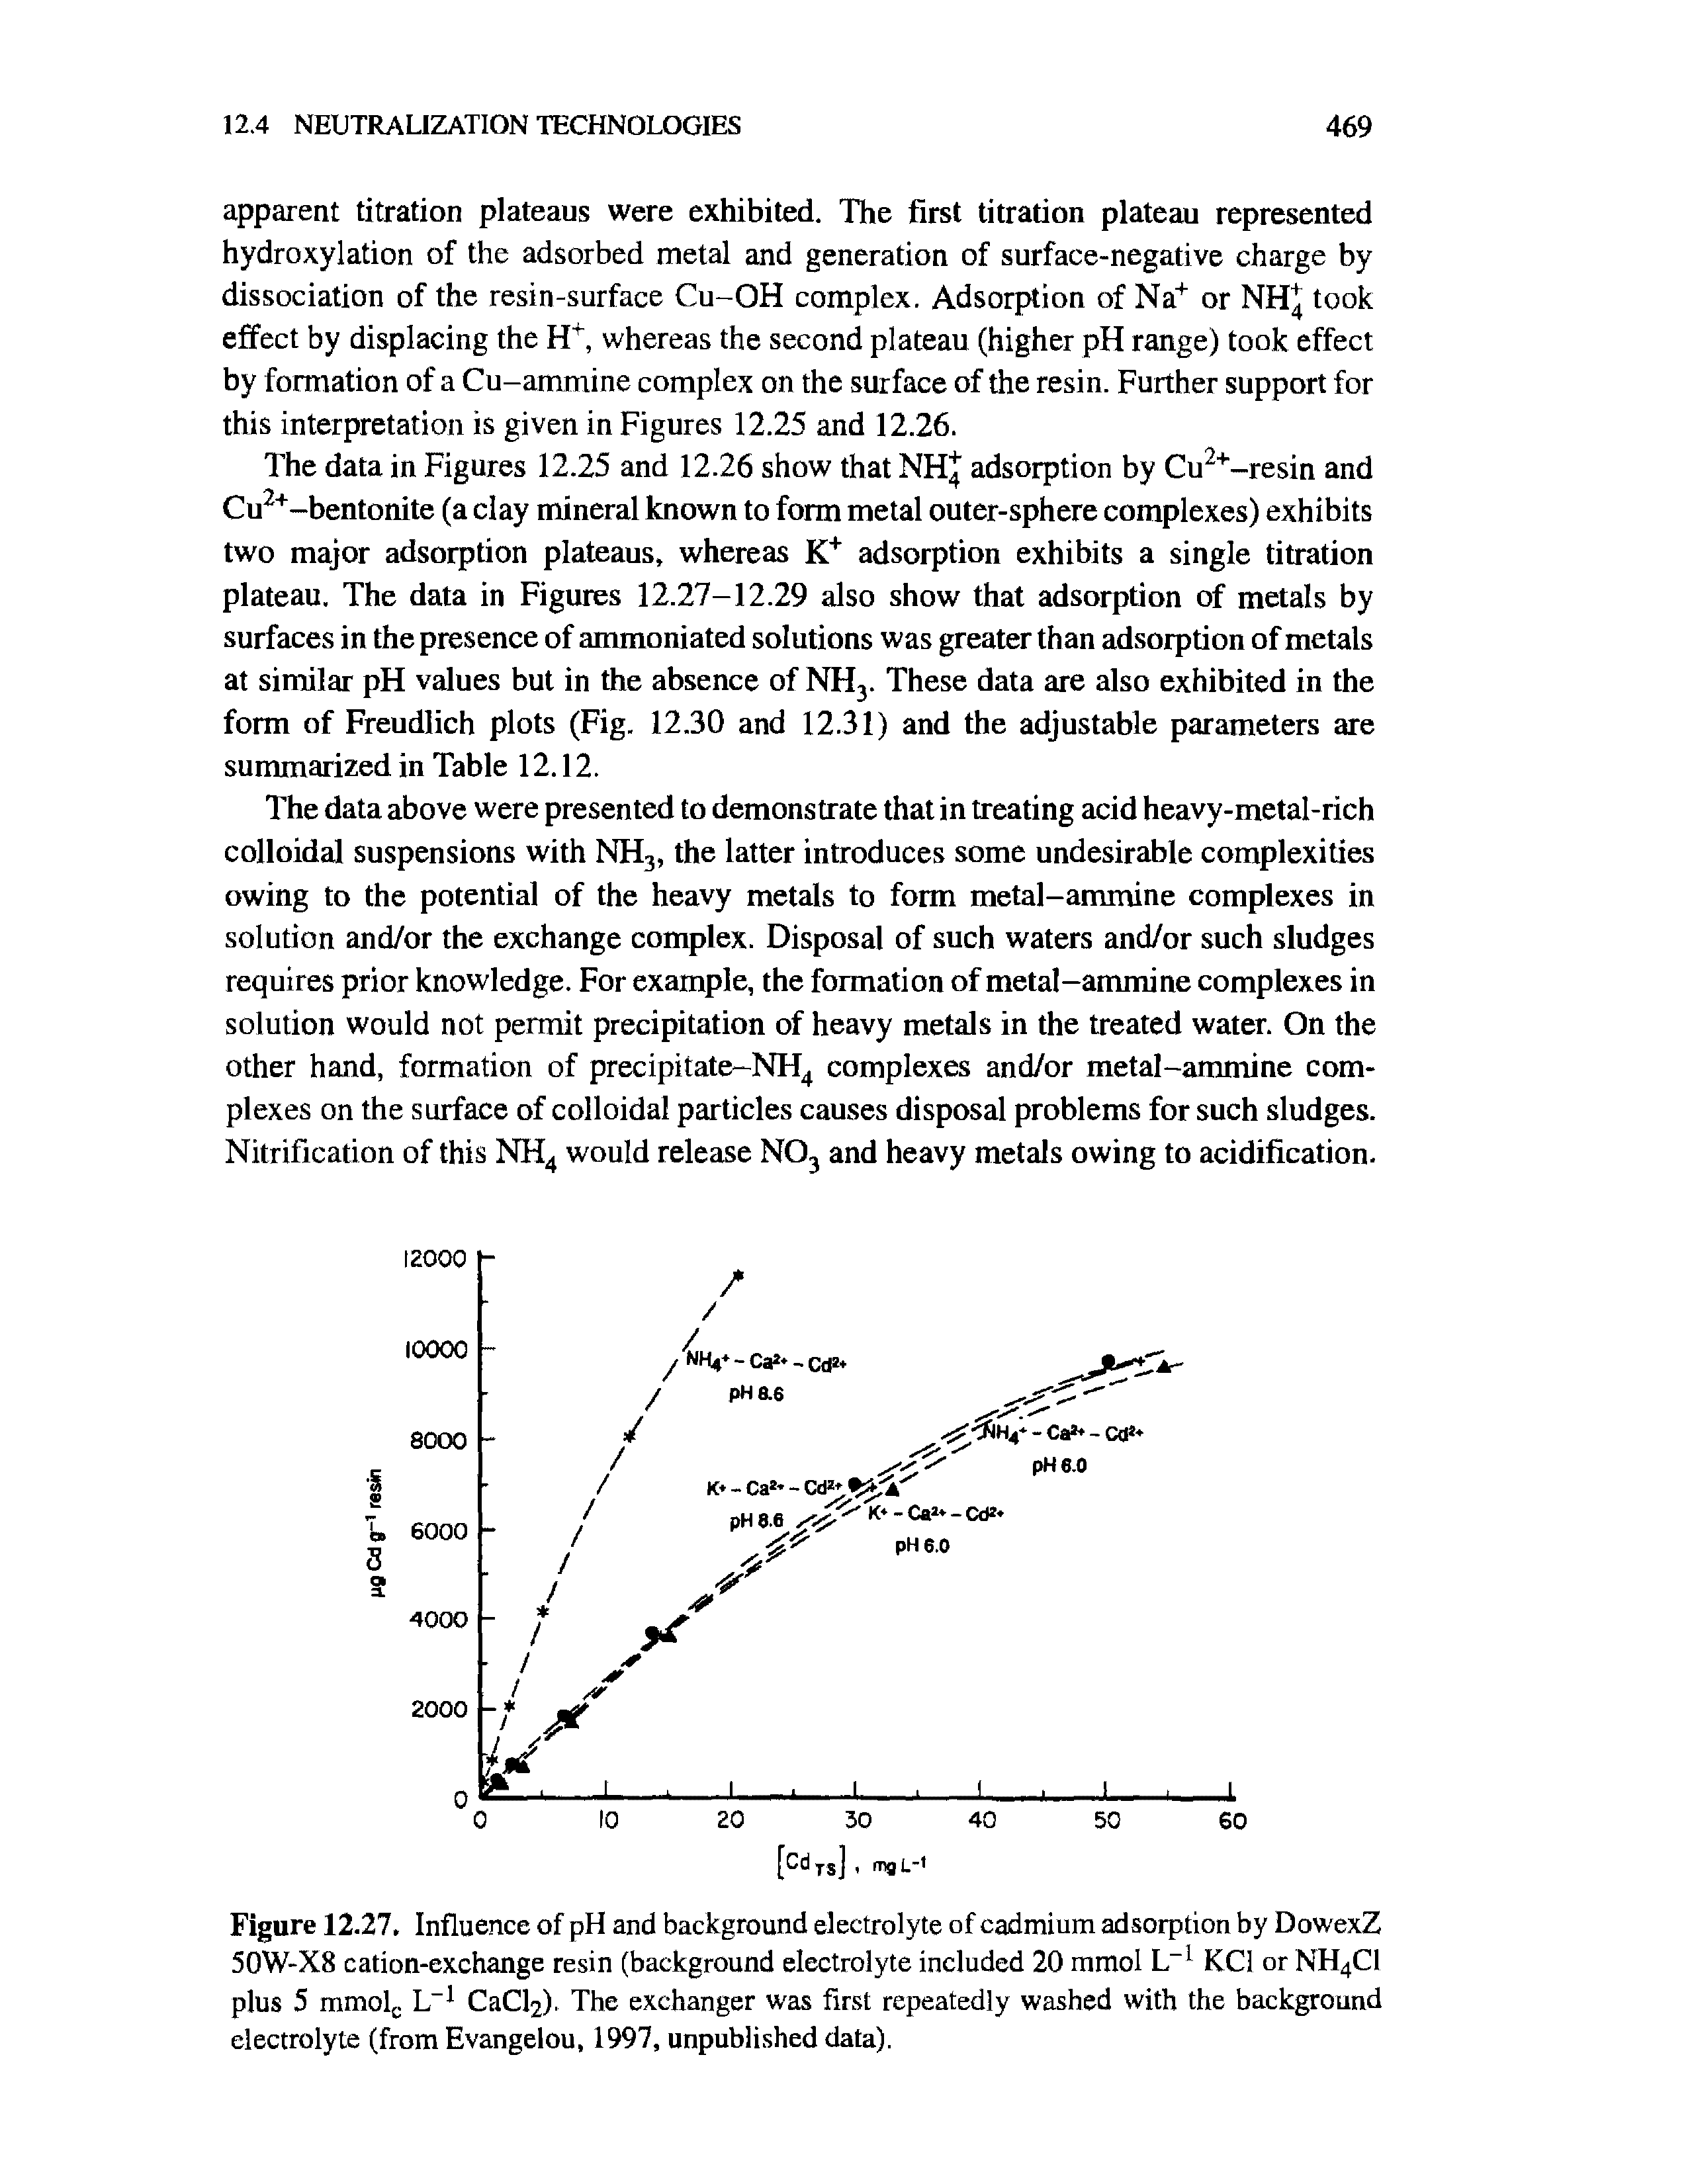 Figure 12.27, Influence of pH and background electrolyte of cadmium adsorption by DowexZ 50W-X8 cation-exchange resin (background electrolyte included 20 mmol L l KC1 or NH4C1 plus 5 mmolc L-1 CaClz). The exchanger was first repeatedly washed with the background electrolyte (from Evangelou, 1997, unpublished data).